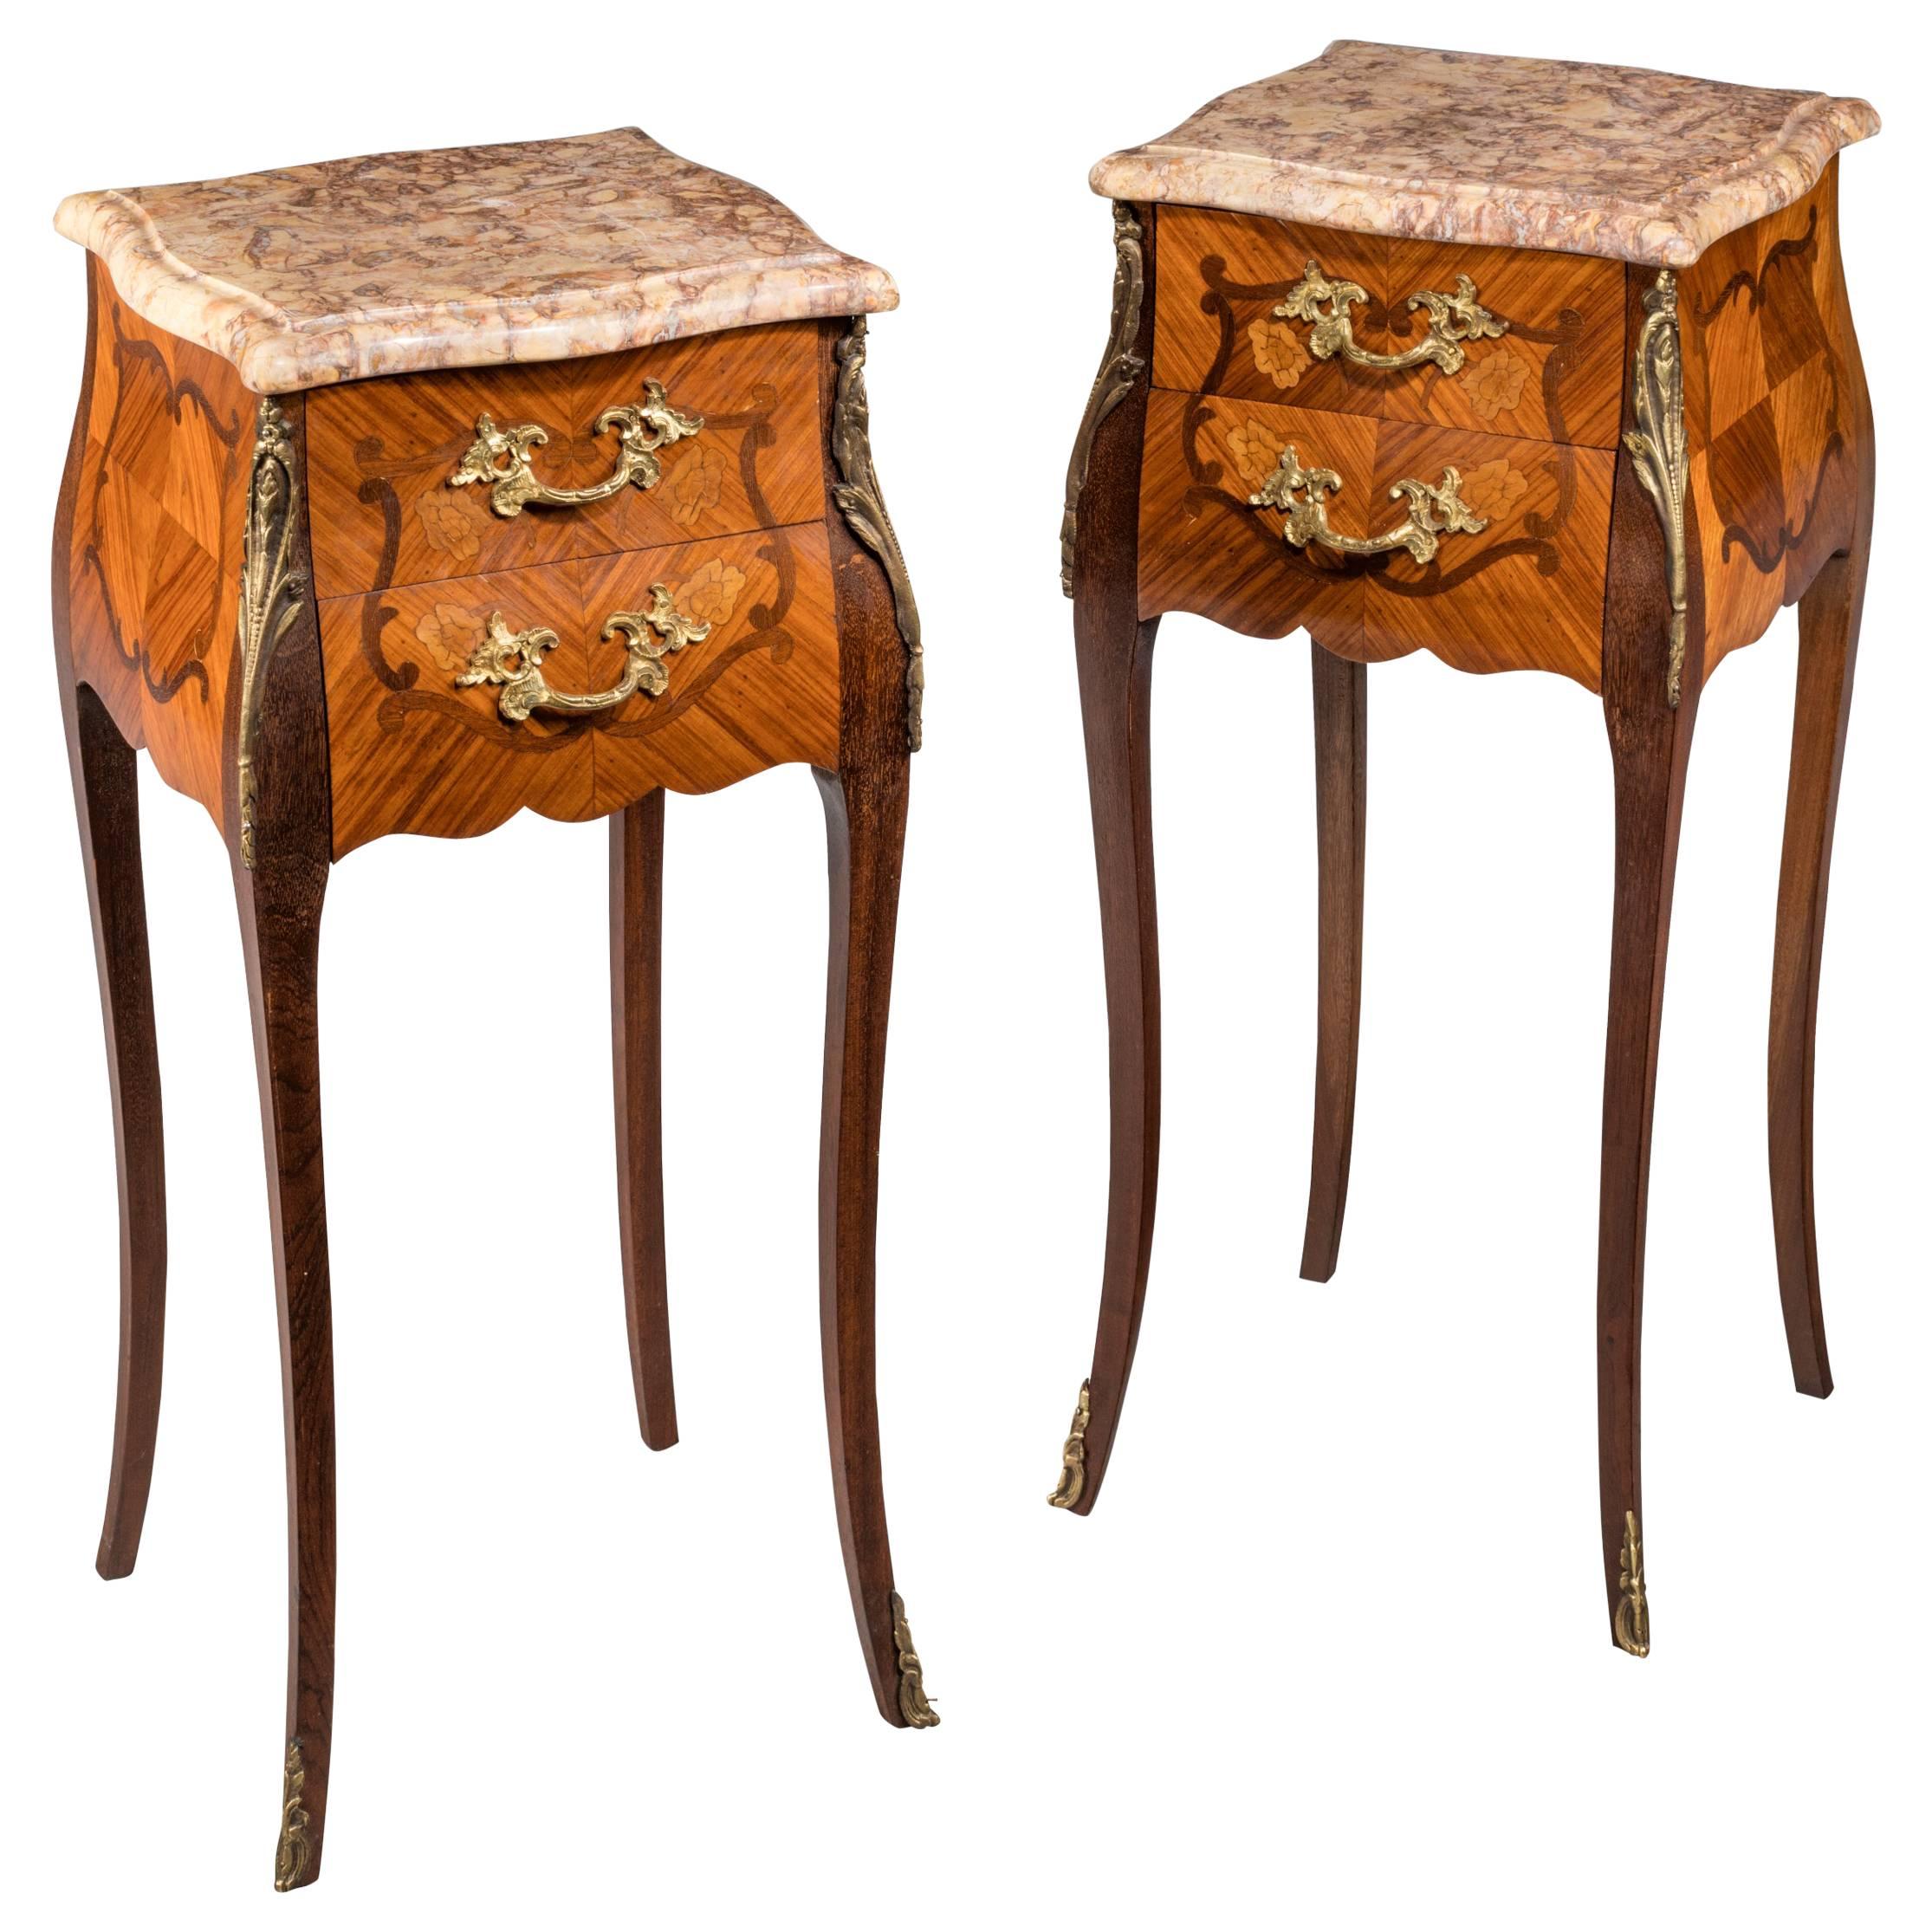 Pair of Late 19th Century Kingwood and Marquetry Petit Commodes